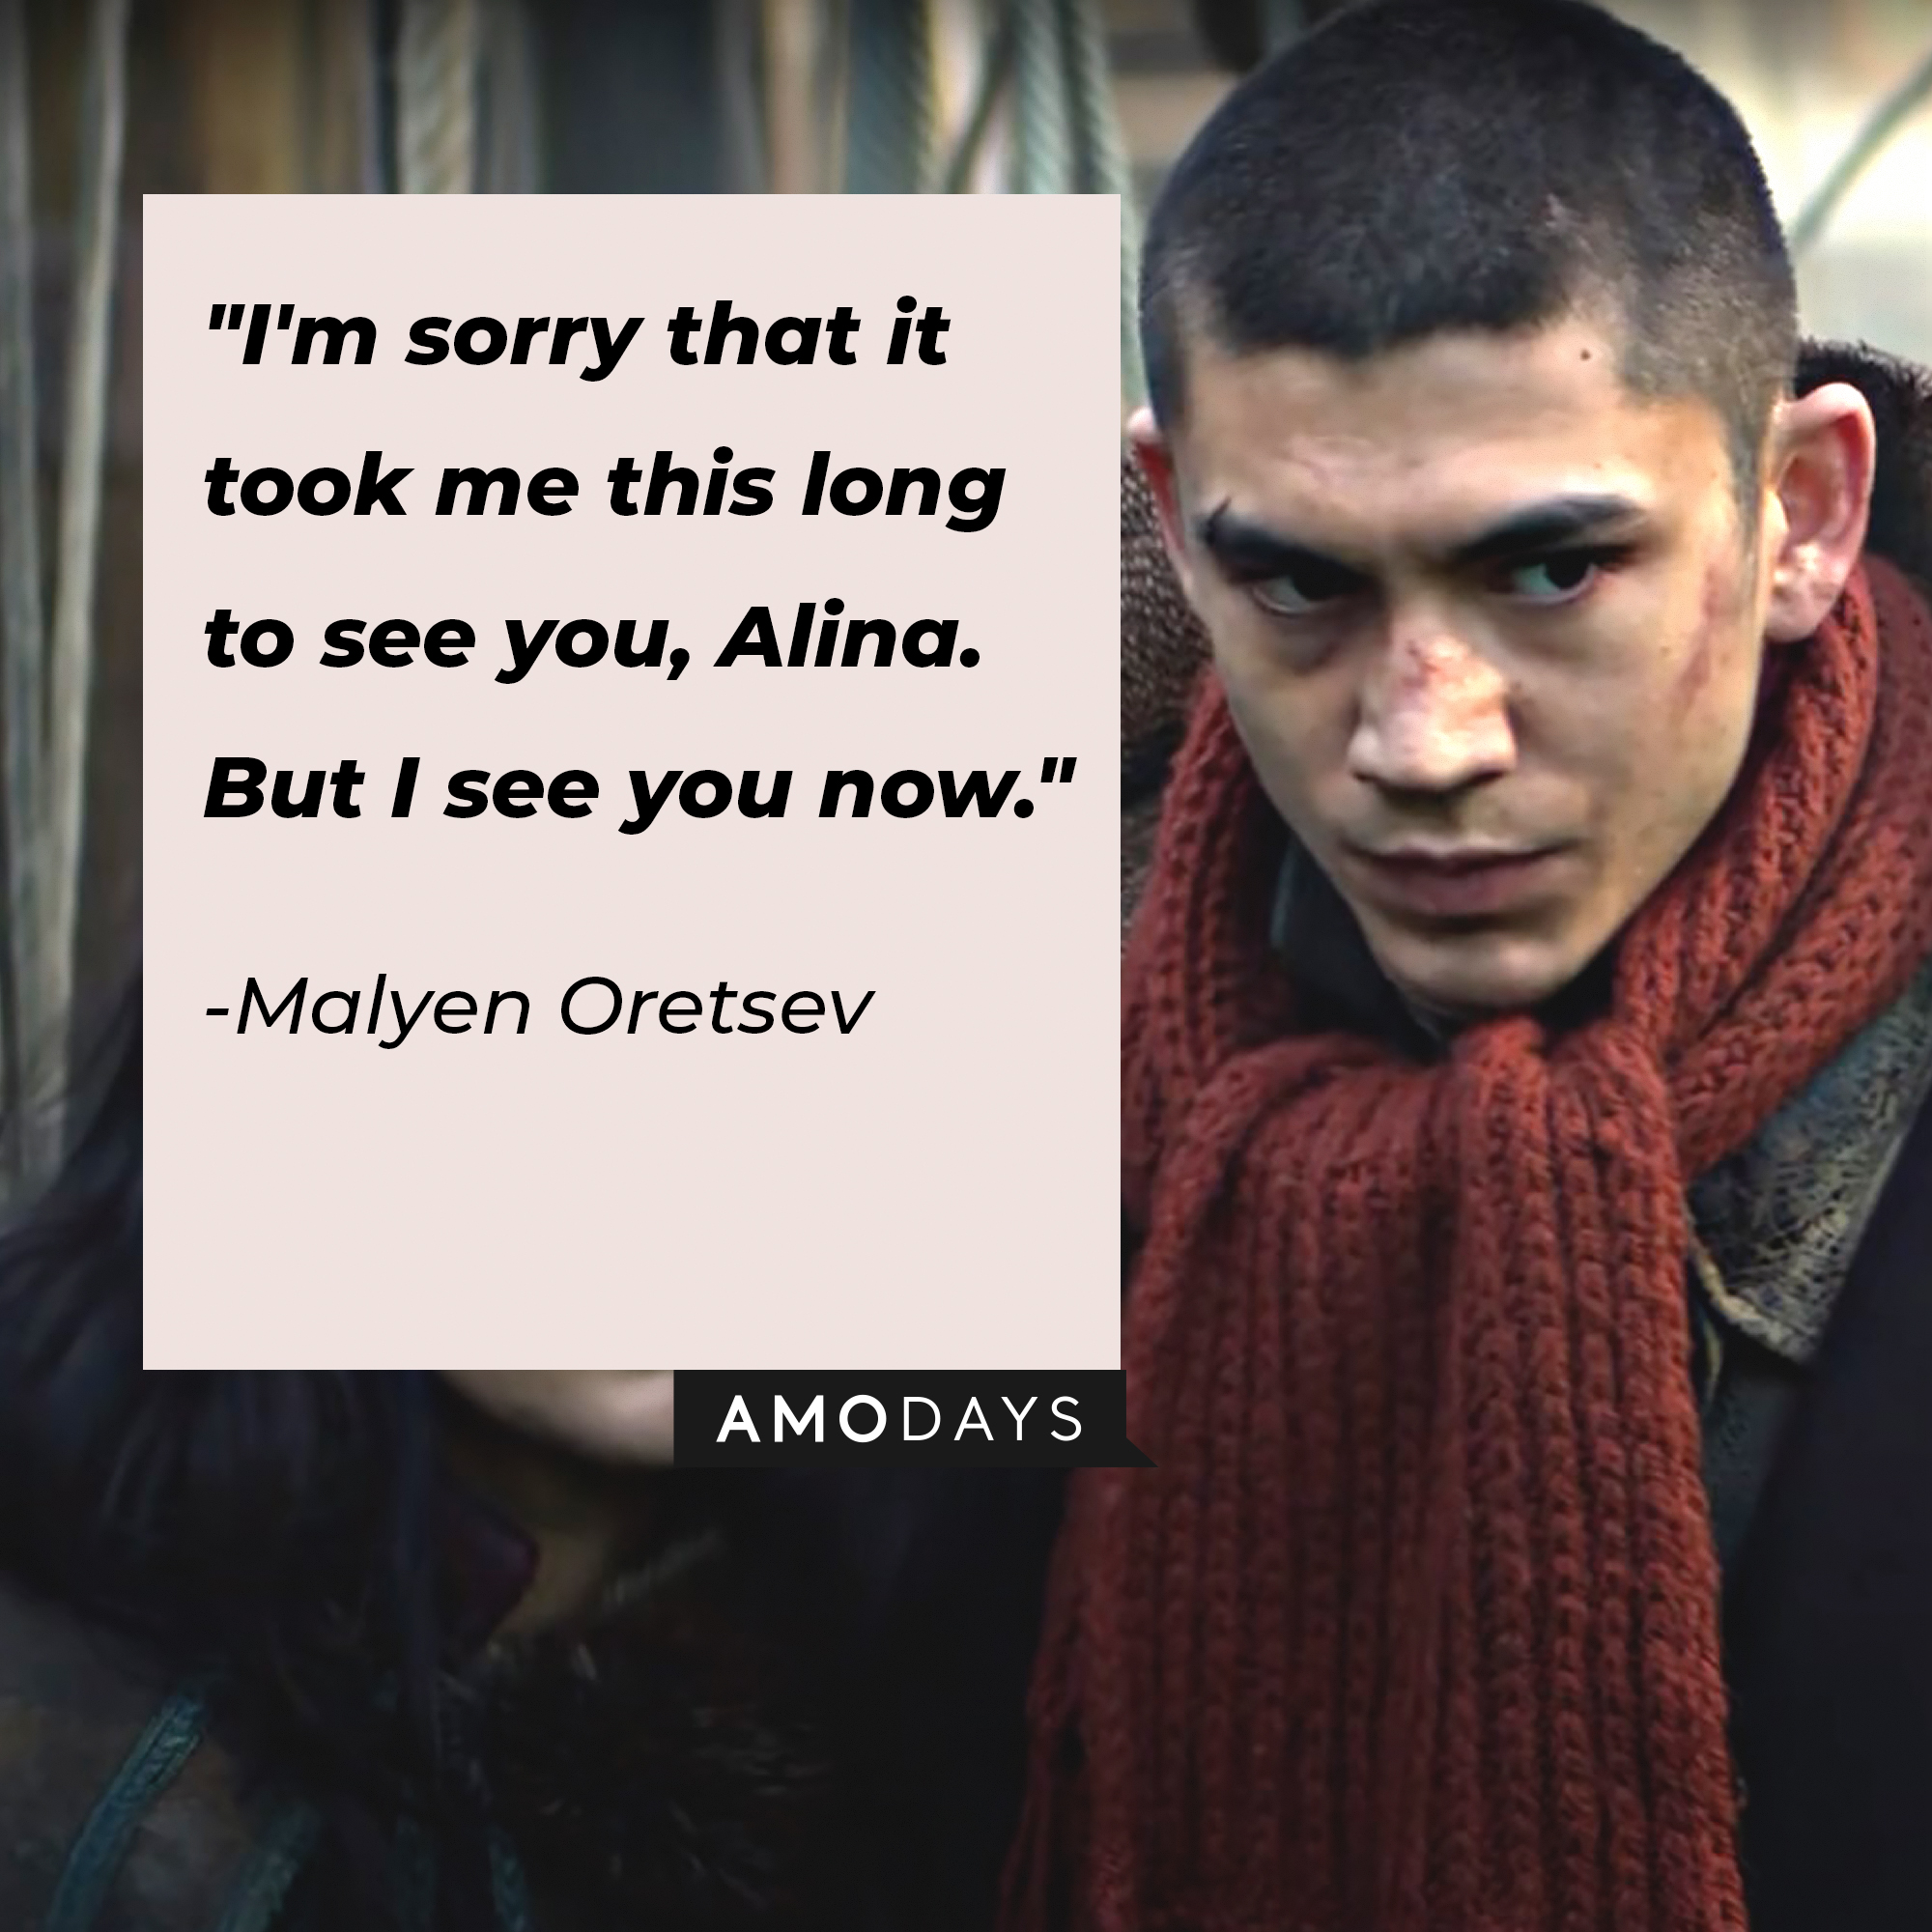 Malyen Oretsev's quote: "I'm sorry that it took me this long to see you, Alina. But I see you now." | Image: AmoDays